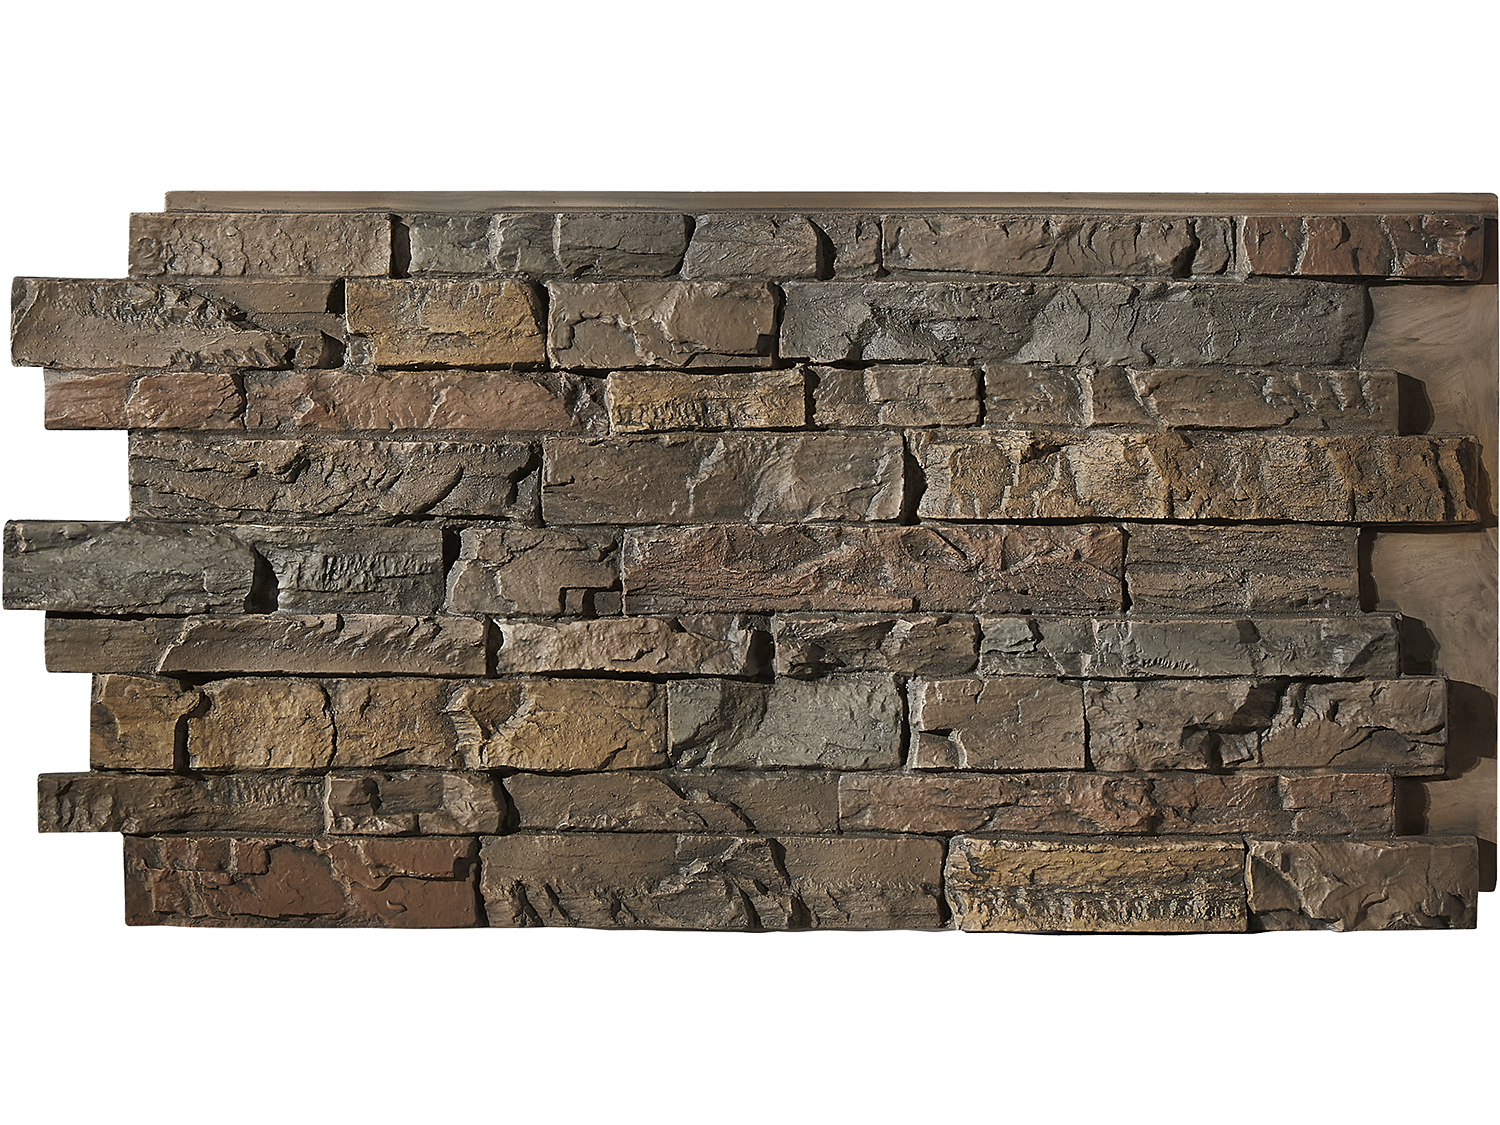 Where to buy Nevada Dry Stack faux stone panels?